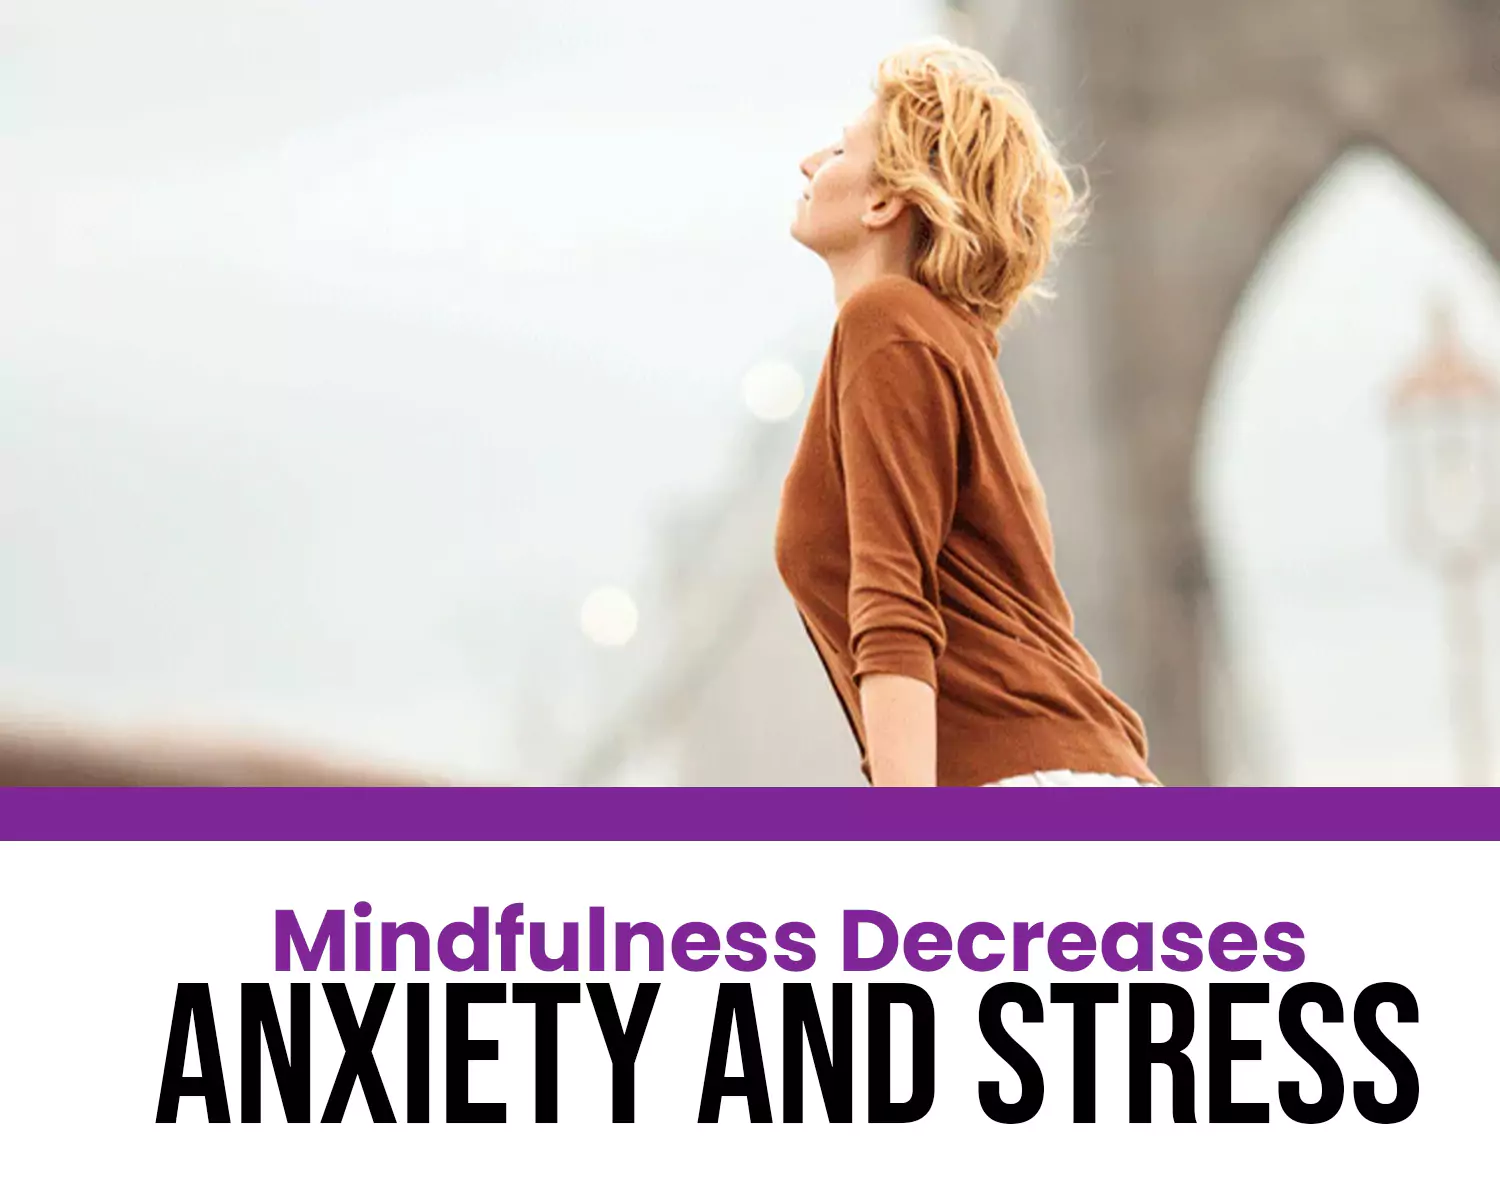 Mindfulness Decreases Anxiety and Stress